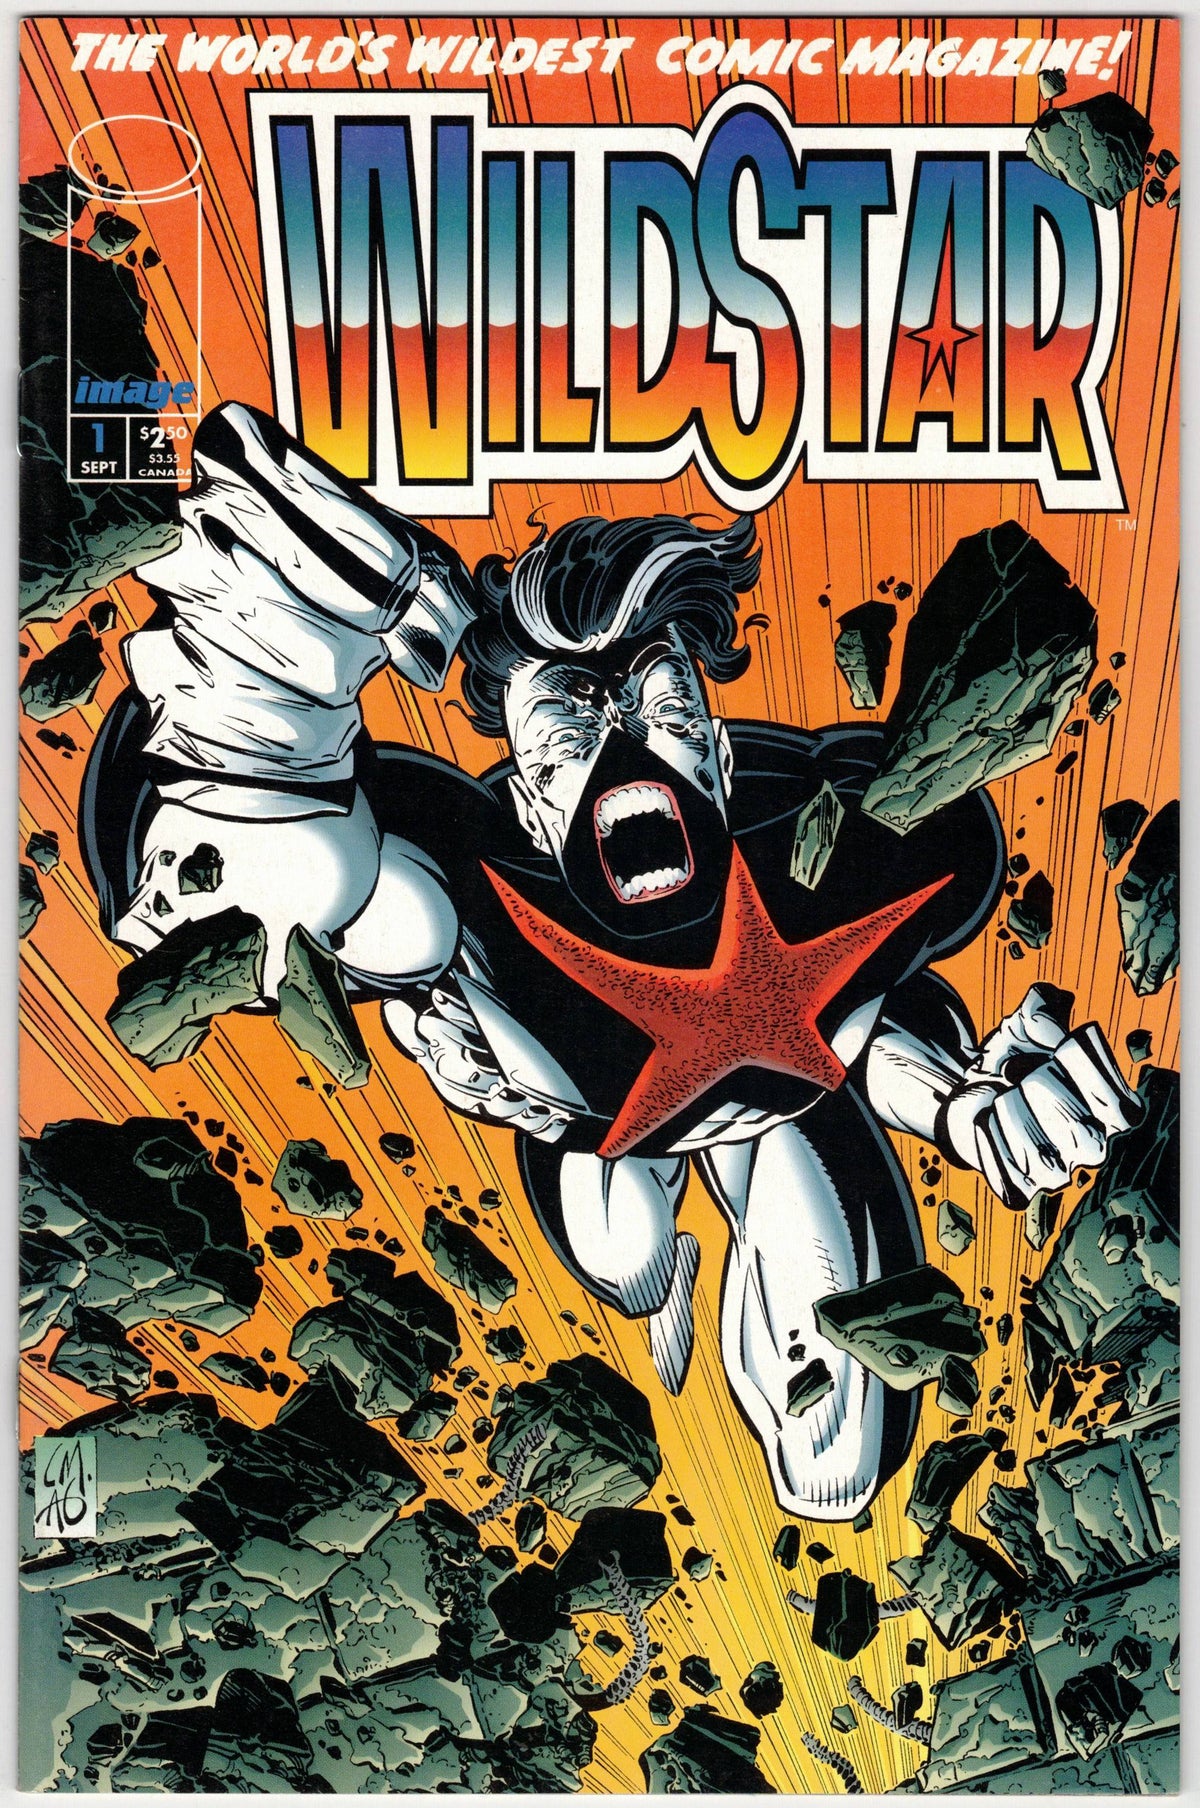 Photo of Wildstar, Vol. 2 (1995) Issue 1B - Comic sold by Stronghold Collectibles